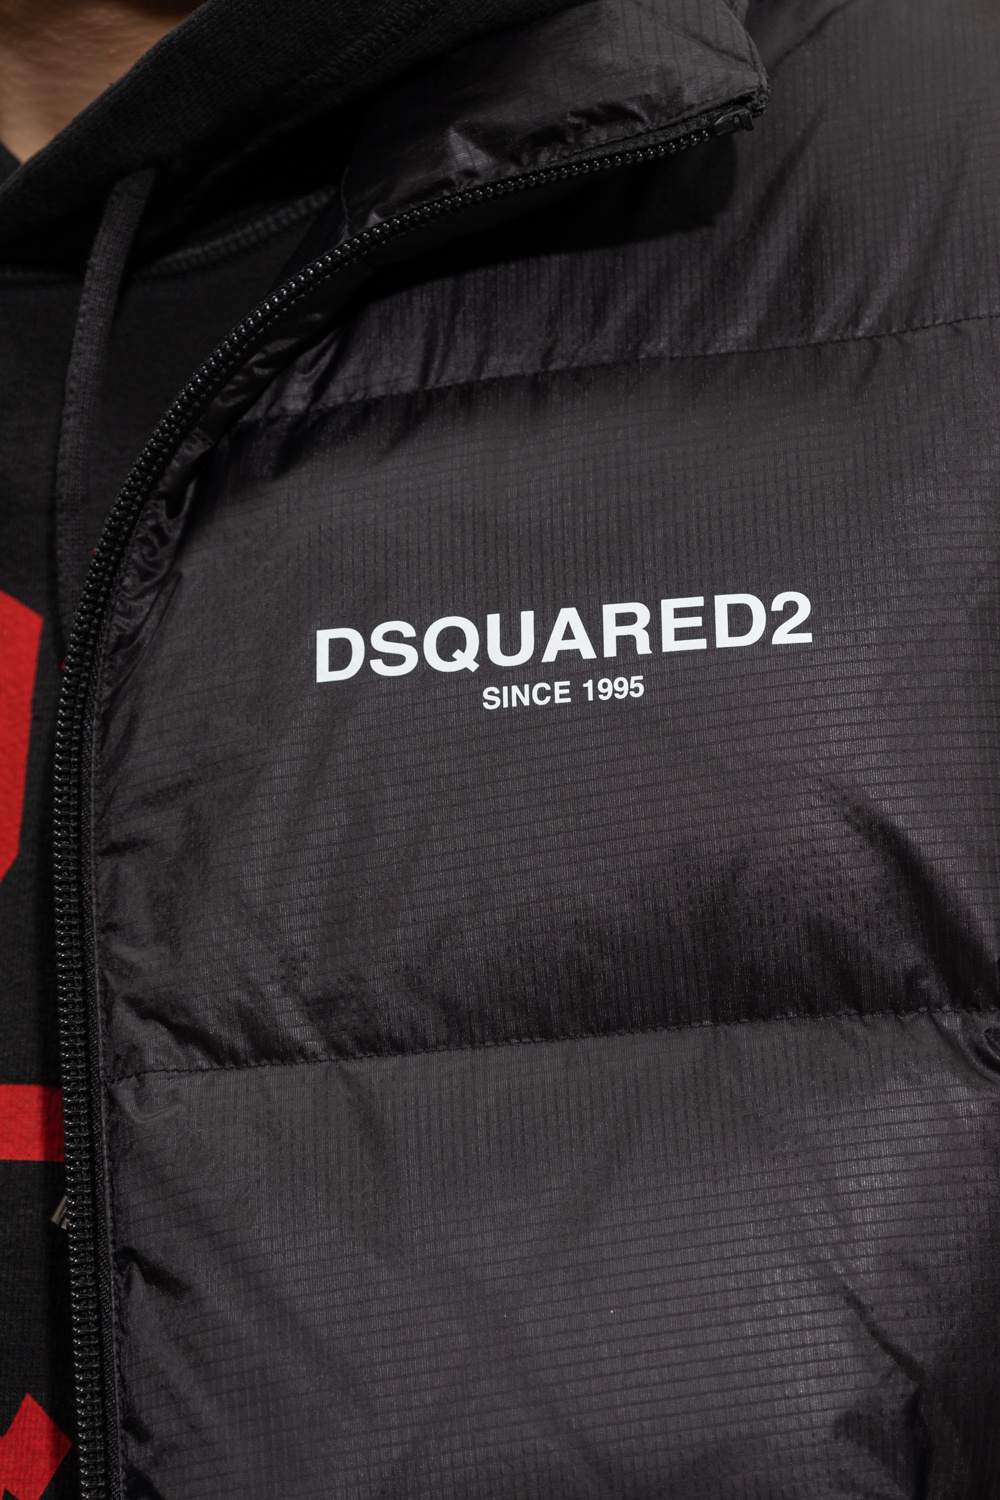 Dsquared2 of the uncompromising Italian brand